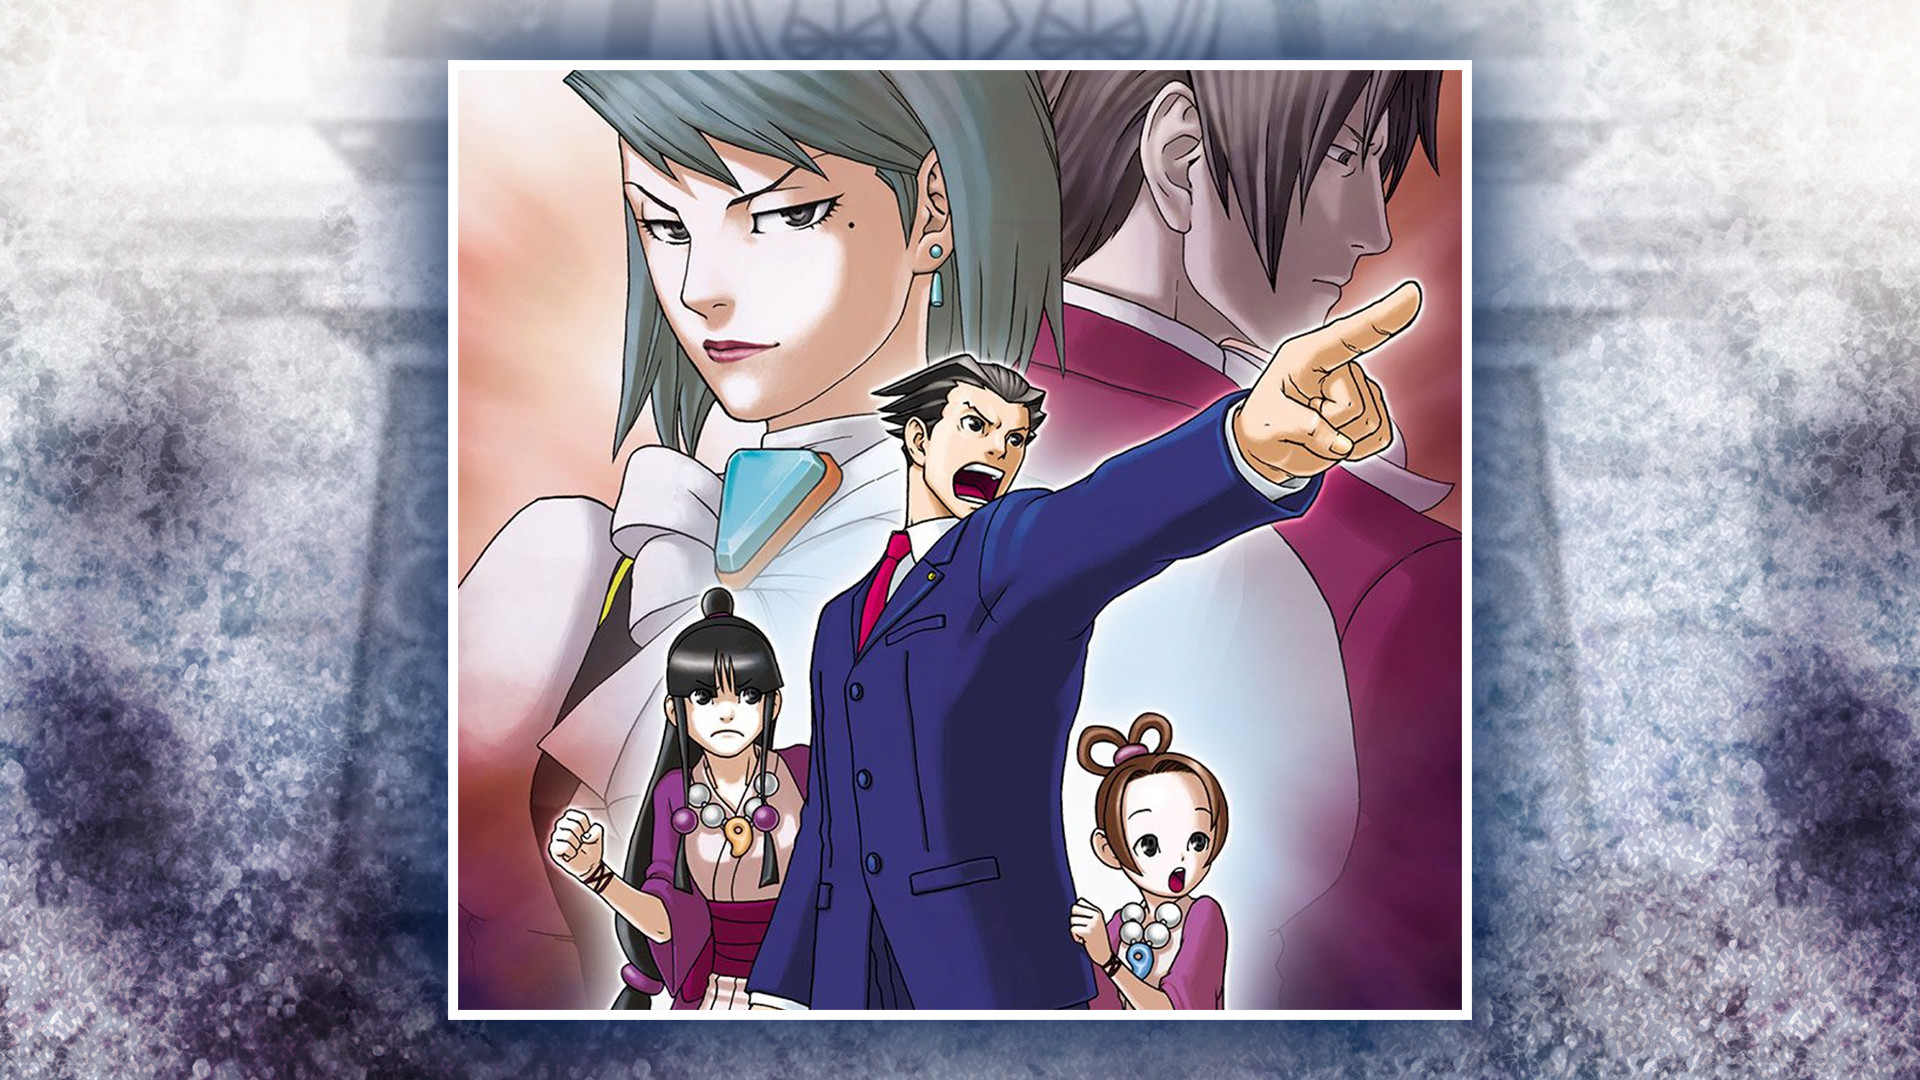 Phoenix Wright: Ace Attorney - Justice for All Original Soundtrack 